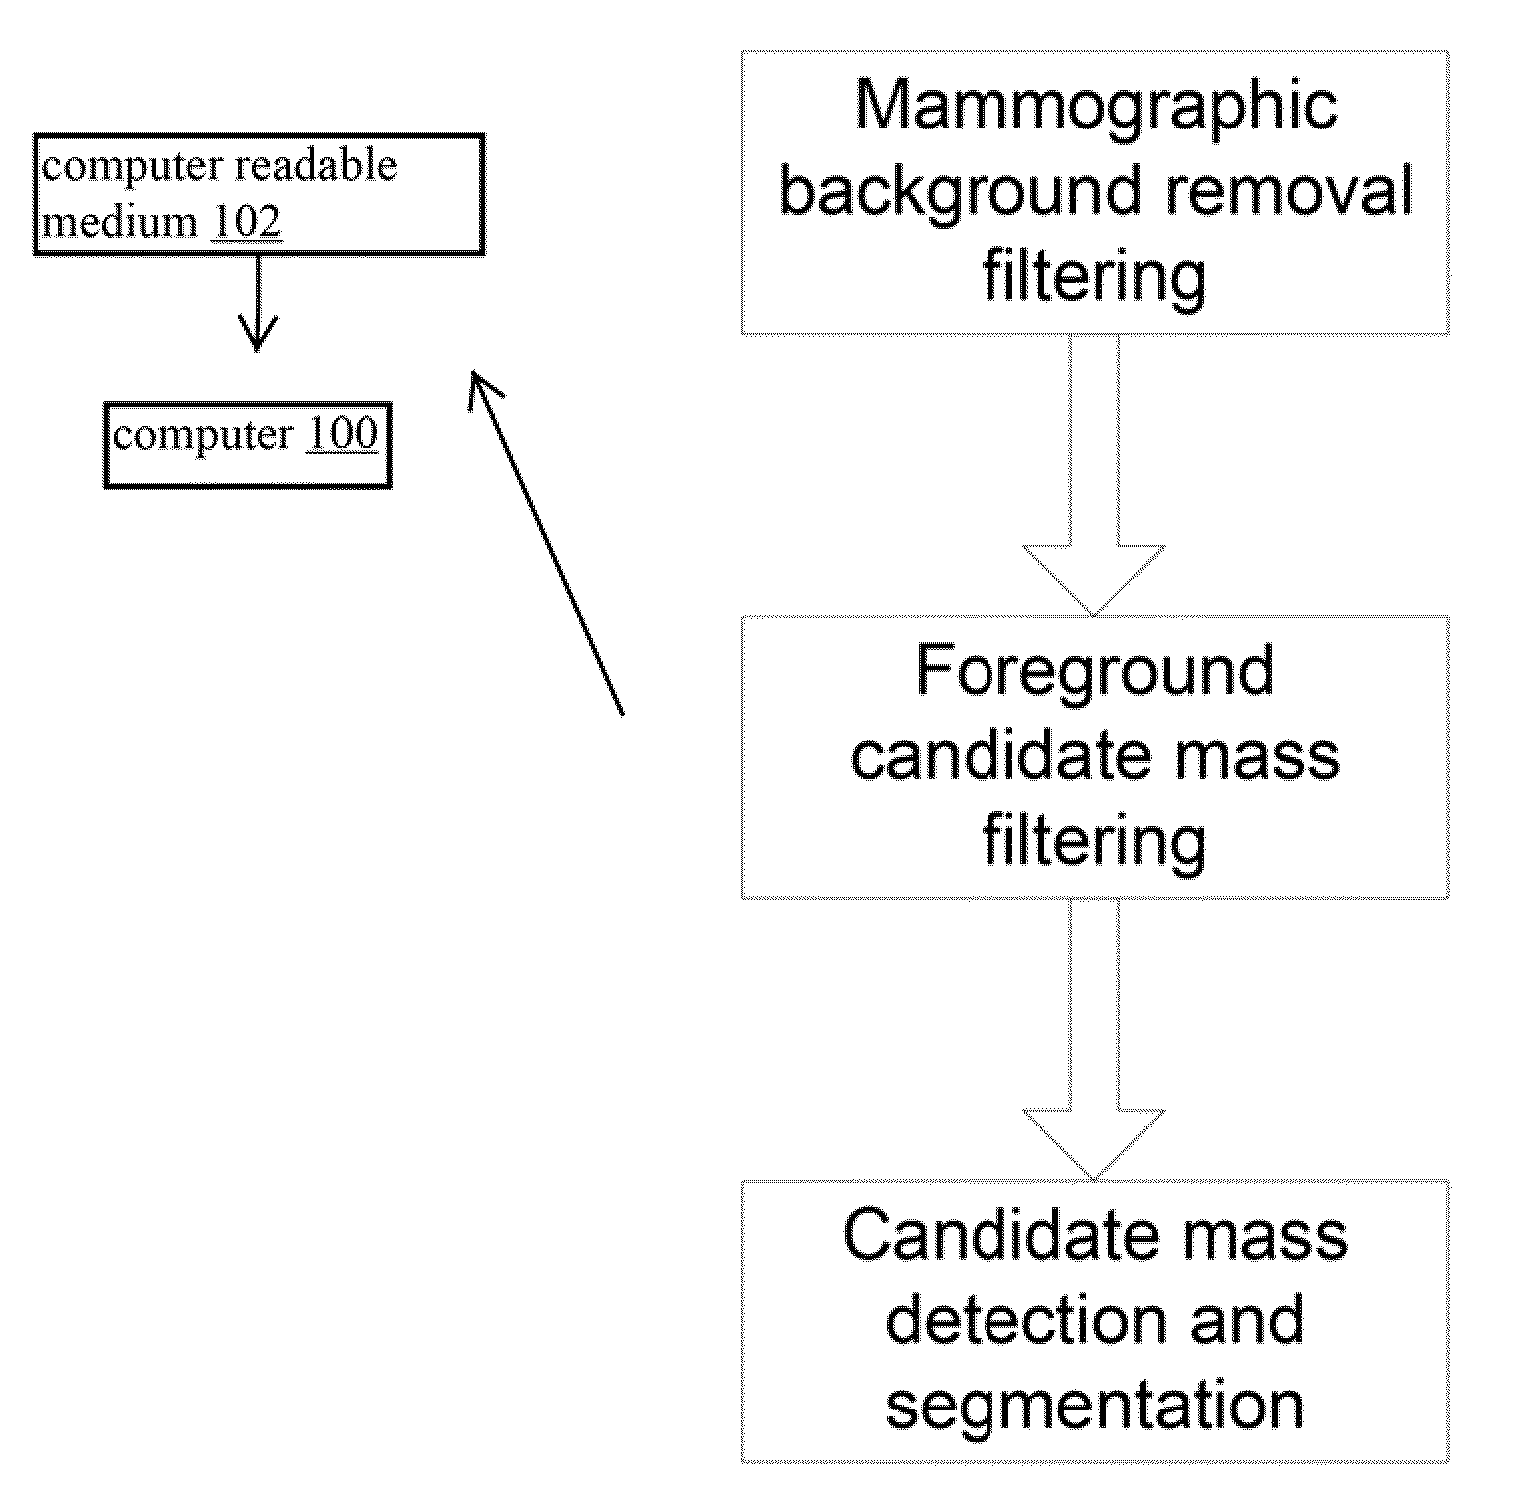 Method for Mass Candidate Detection and Segmentation in Digital Mammograms